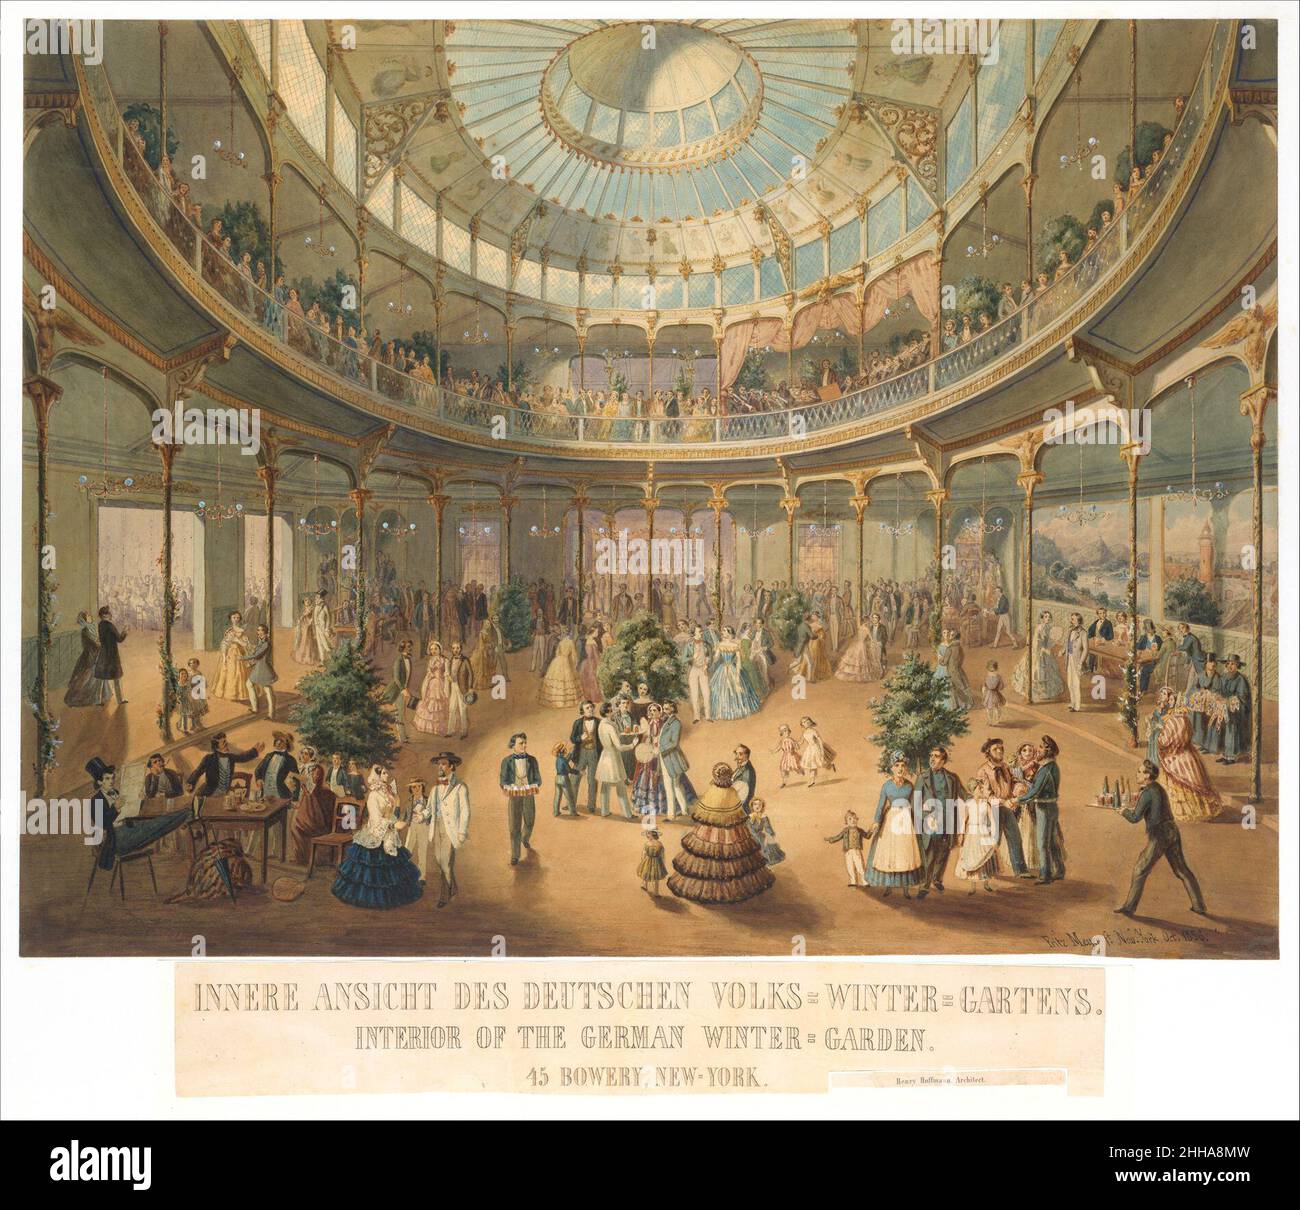 Innere Ansicht des Deutschen Volks Winter Gartens. IInterior of the German Winter Garden. 45 Bowery, New York 1856 Fritz Meyer American The watercolor shows the Interior of a large entertainment center that stood at 45 Bowery, New York, designed by Henry Hoffmann. Oval in shape, the large open center walit from above by glass skylights and surrounded by an arcade of slender columns, with a balcony around the second floor. New York's beer gardens were built to accomodate German immigrants, with families and children gathering there on Saturday afternoons and Sunday evenings to eat, socialize, s Stock Photo